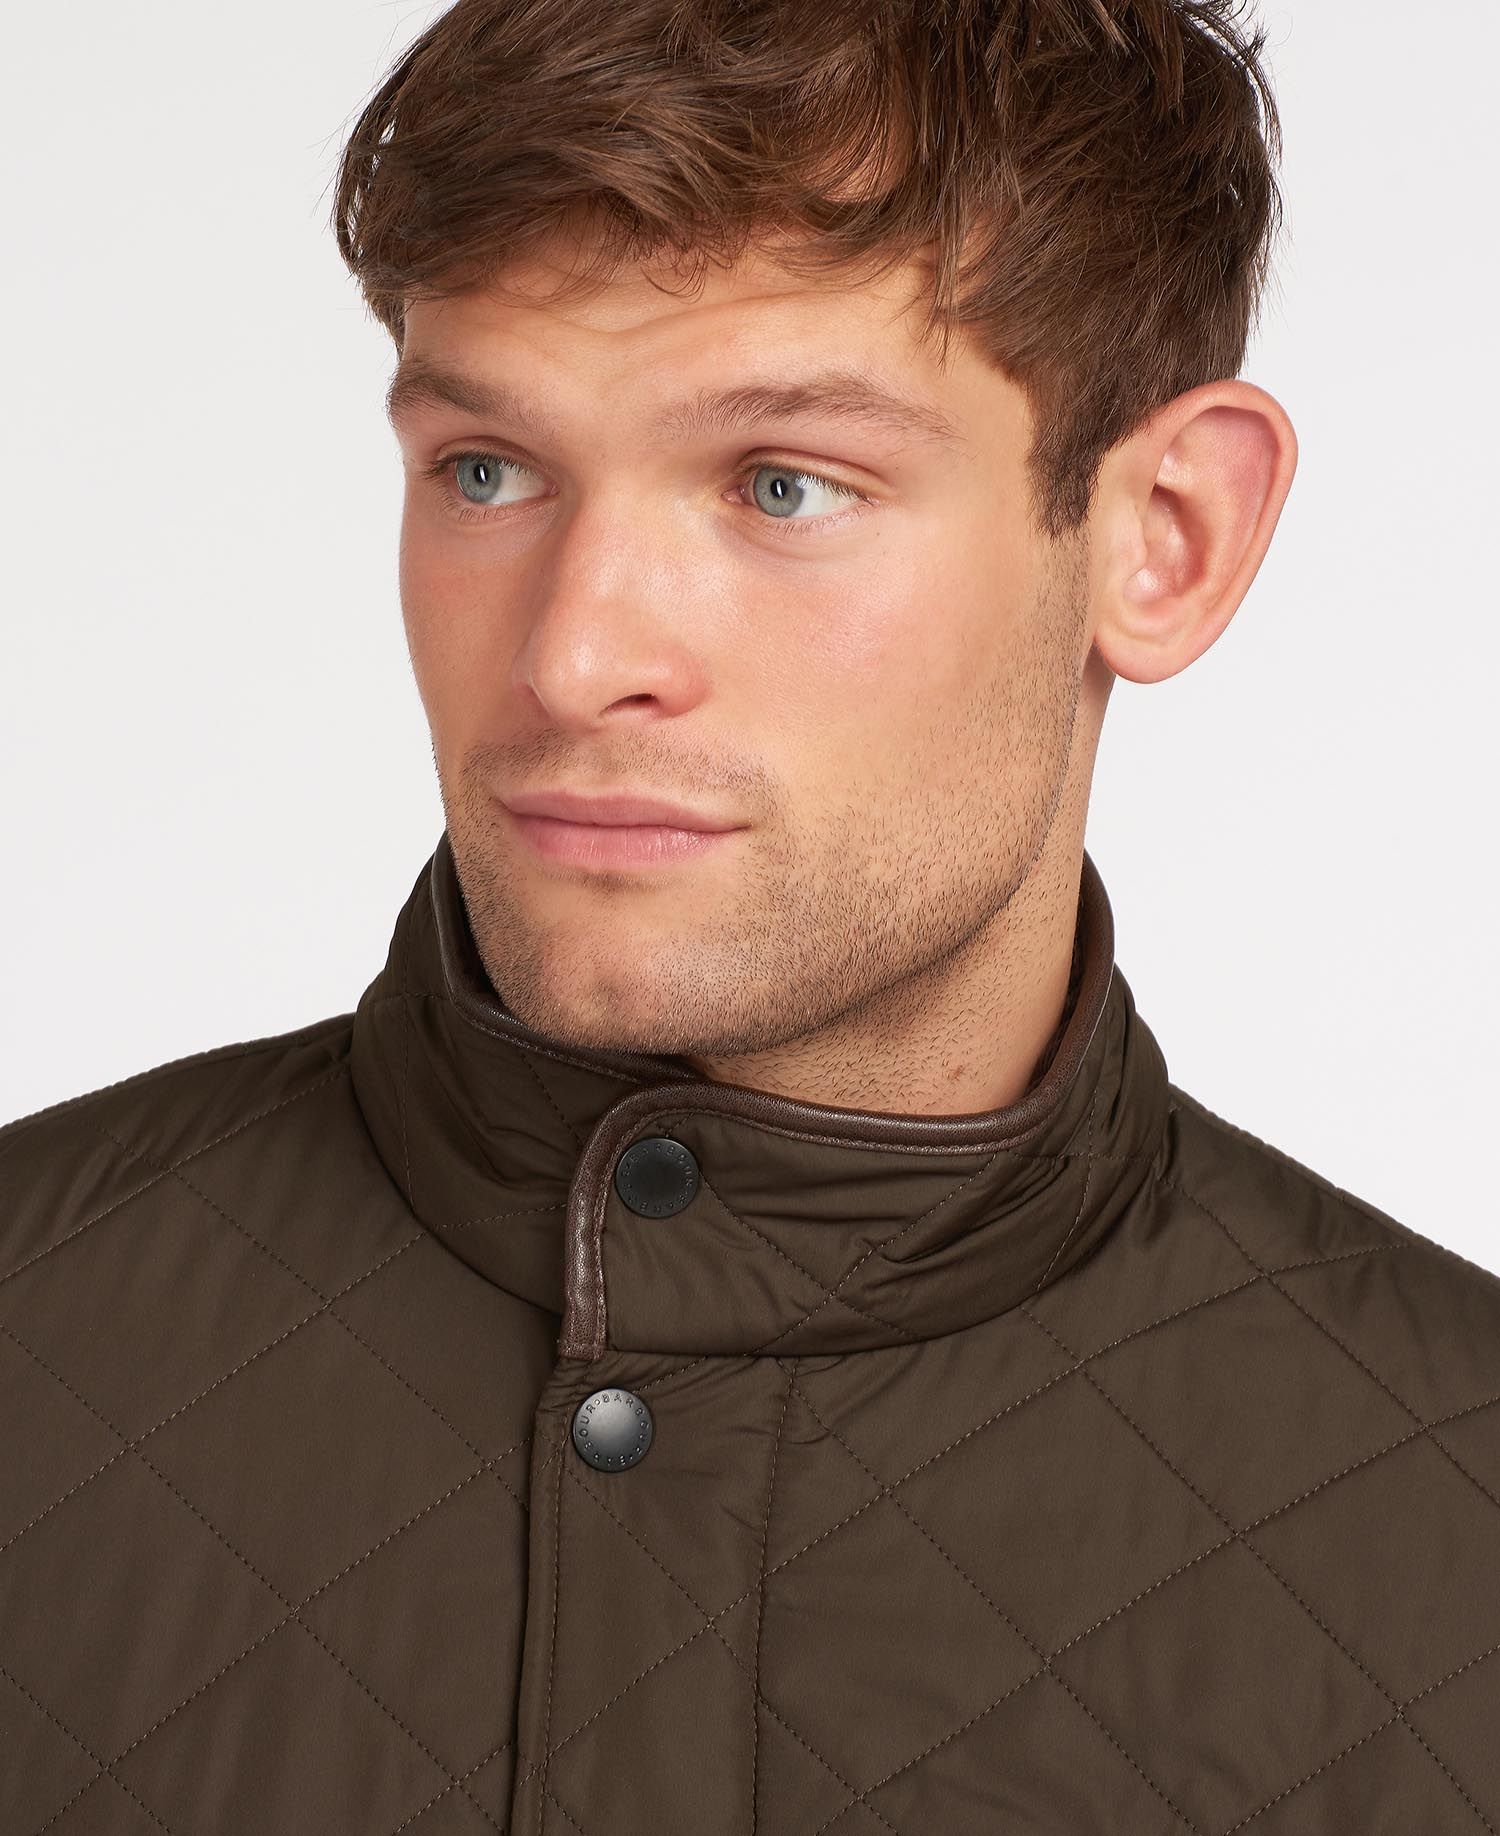 Men's Powell Quilted Jacket - Olive